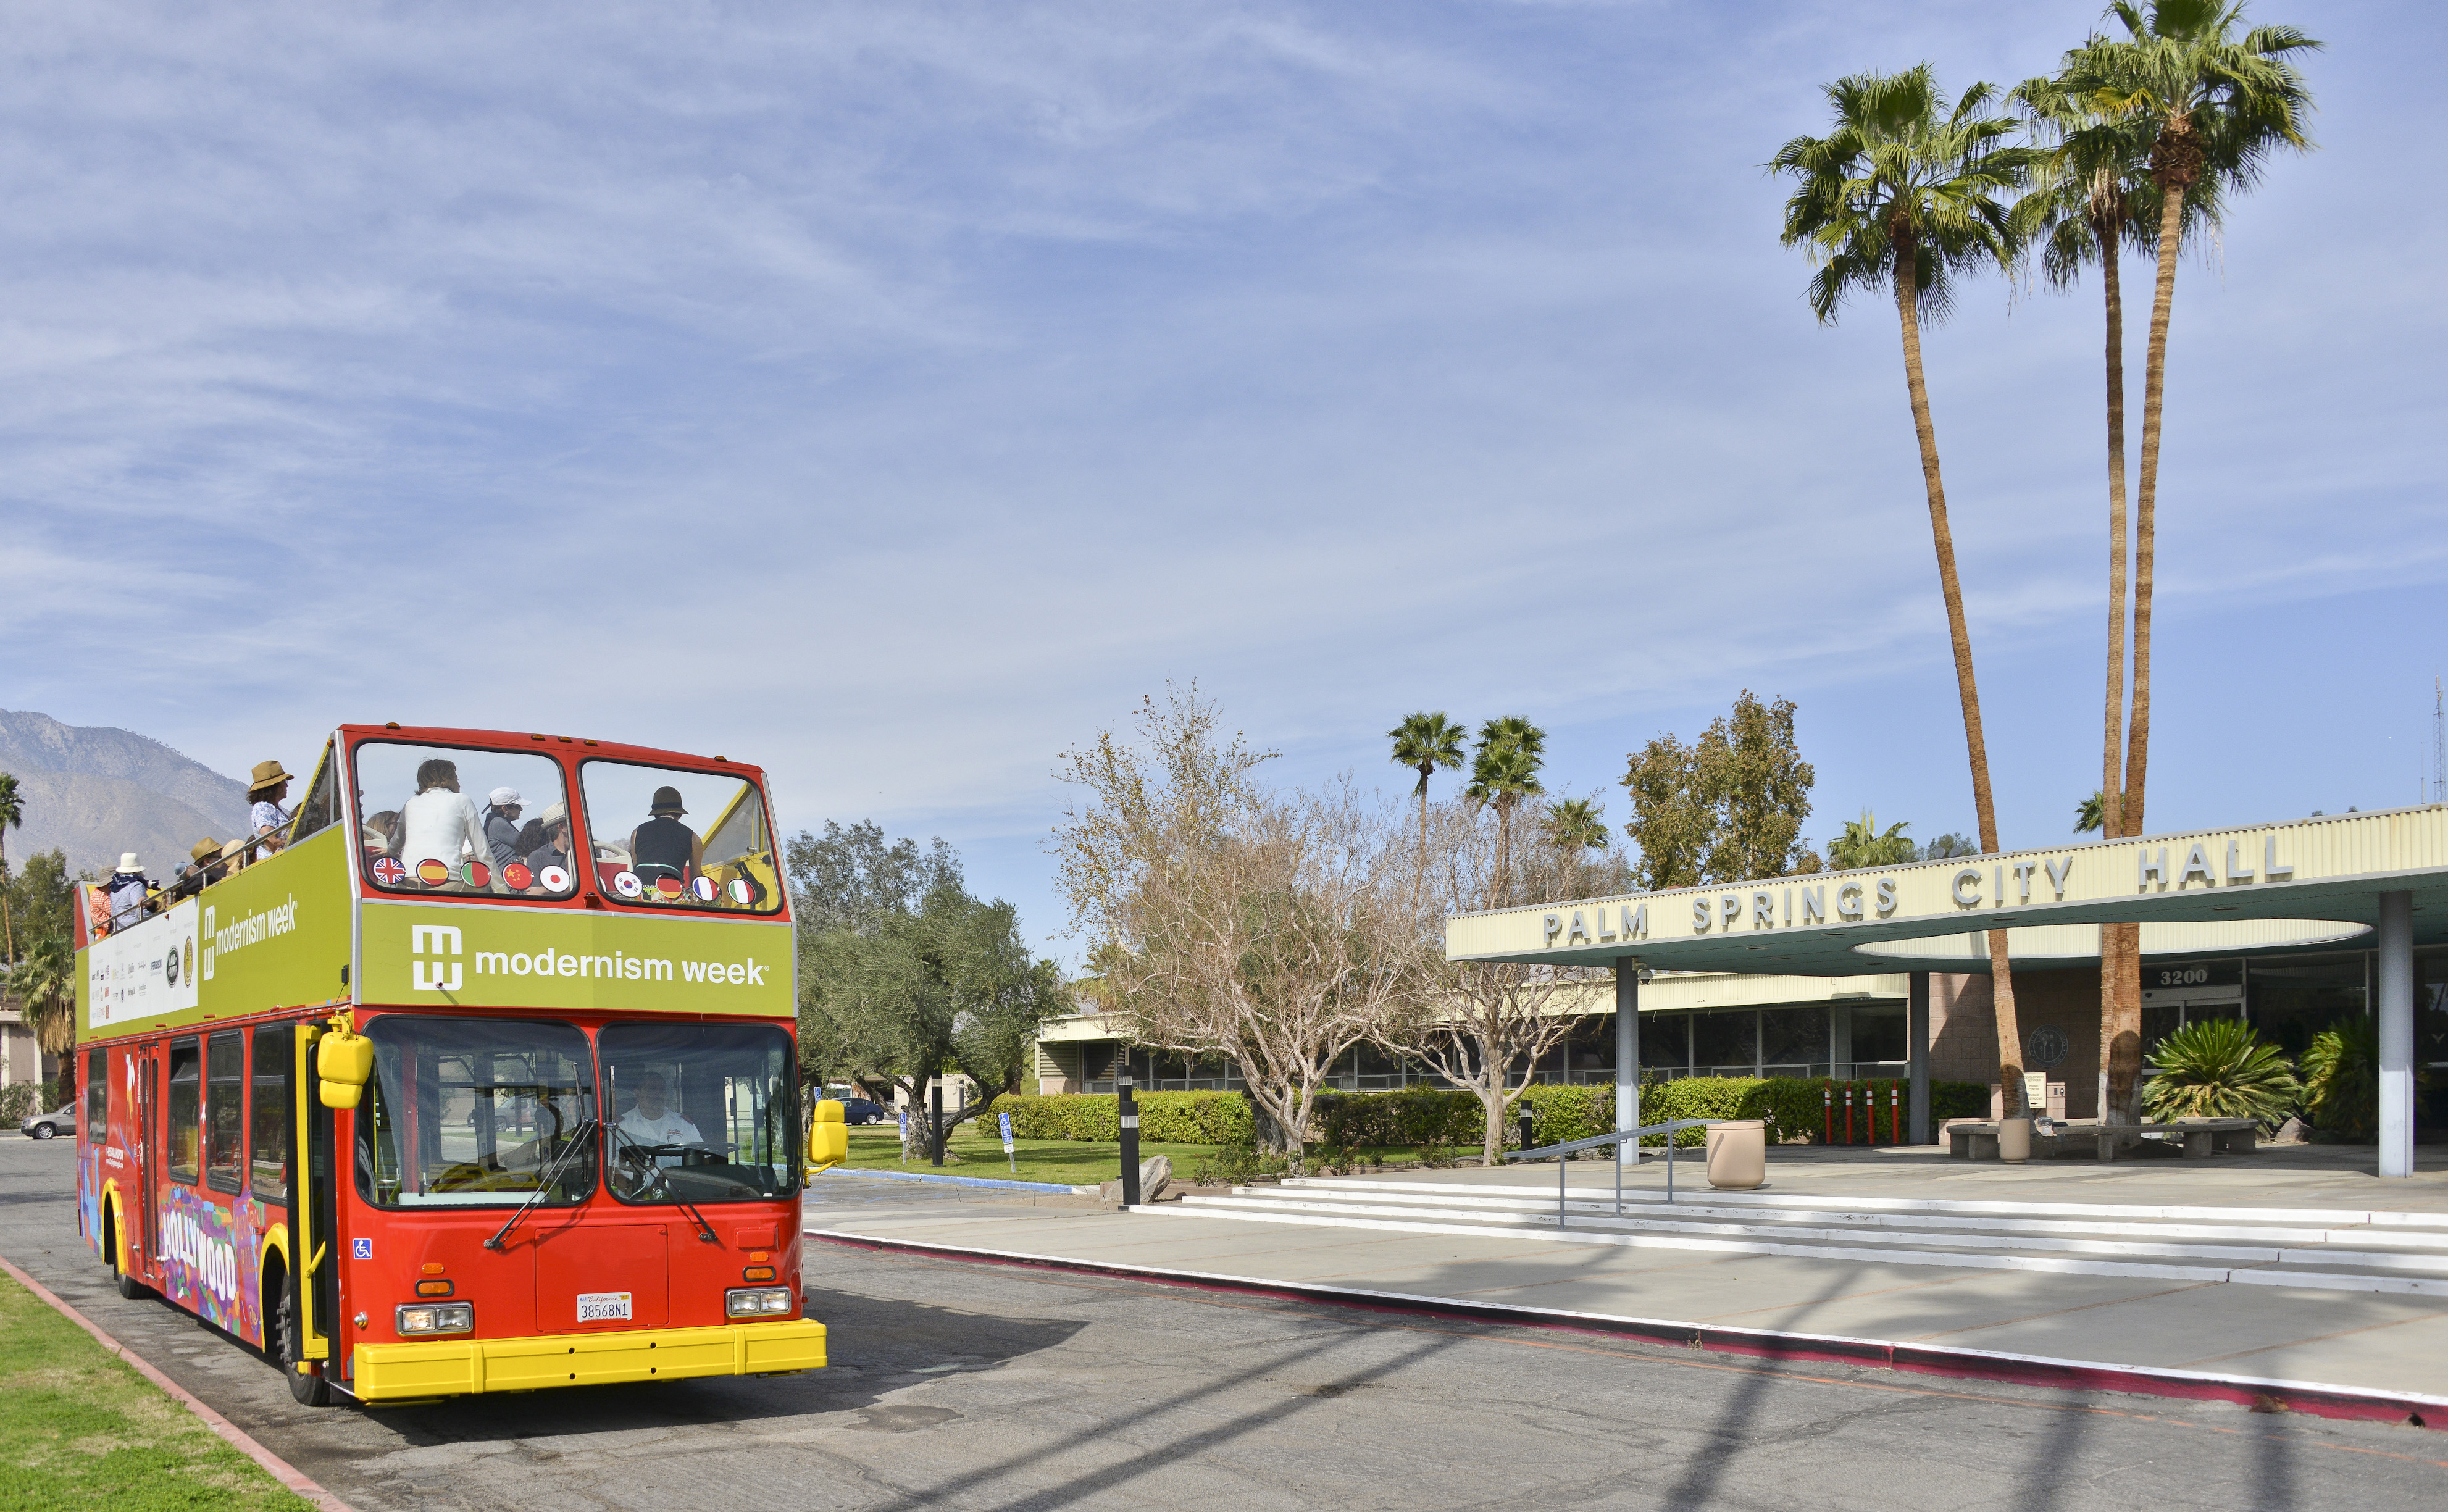 Modernism Week Bus Tour w/ Palm Springs City Hall in background - By David A. Lee